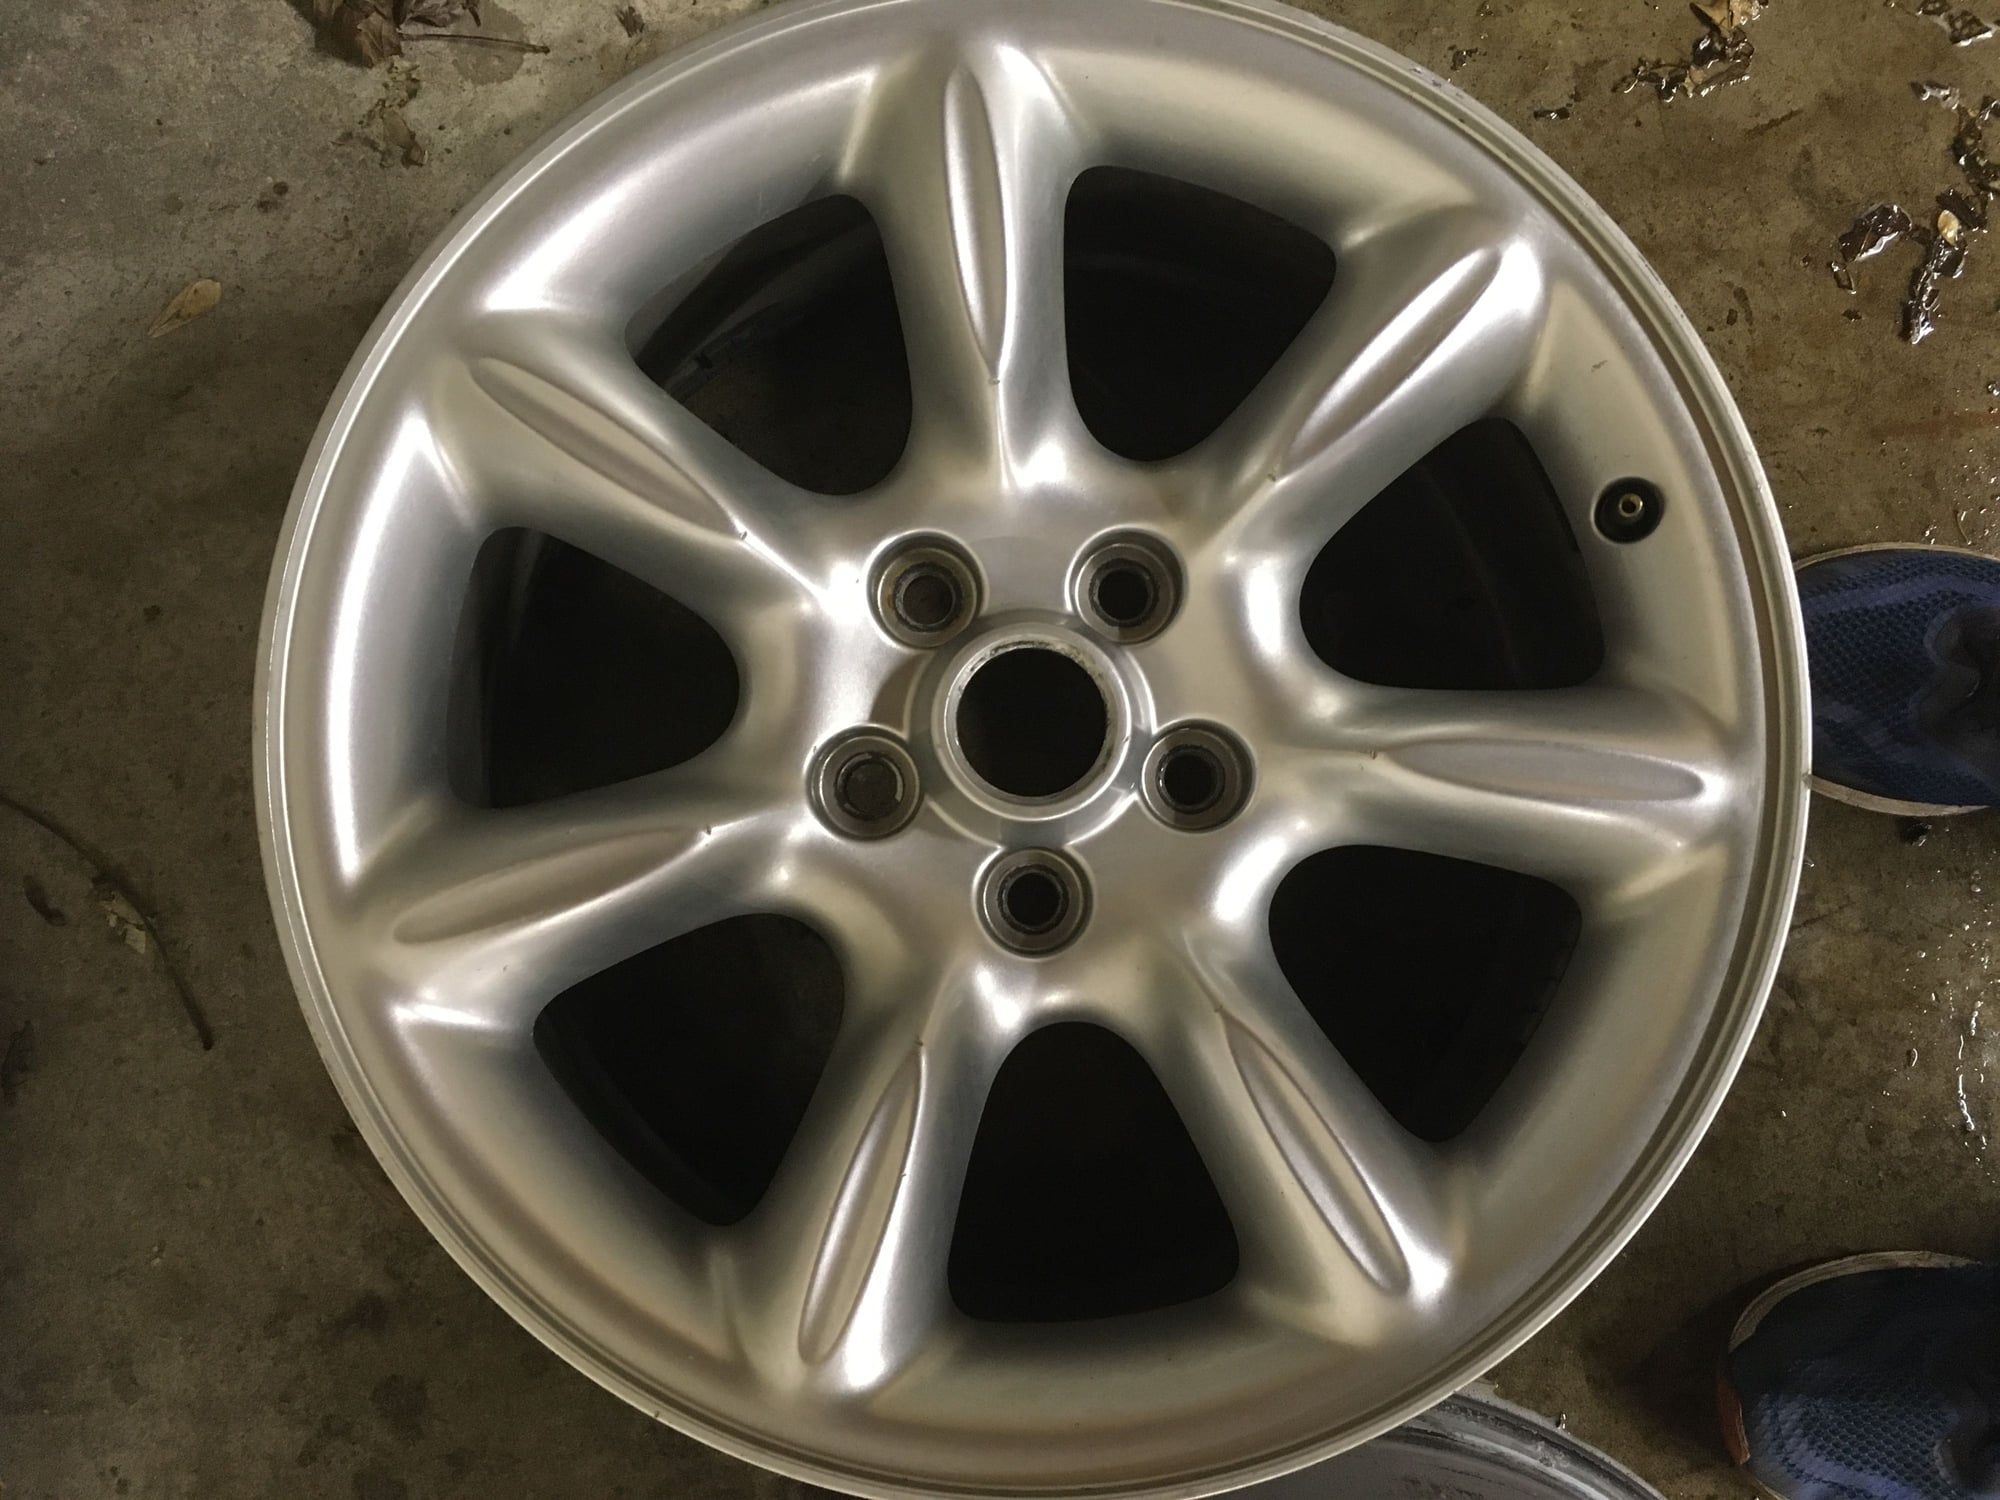 Wheels and Tires/Axles - Jaguar Asteroid Wheels (2000 XJR) - Used - 1997 to 2003 Jaguar XJR - Holly, MI 48442, United States